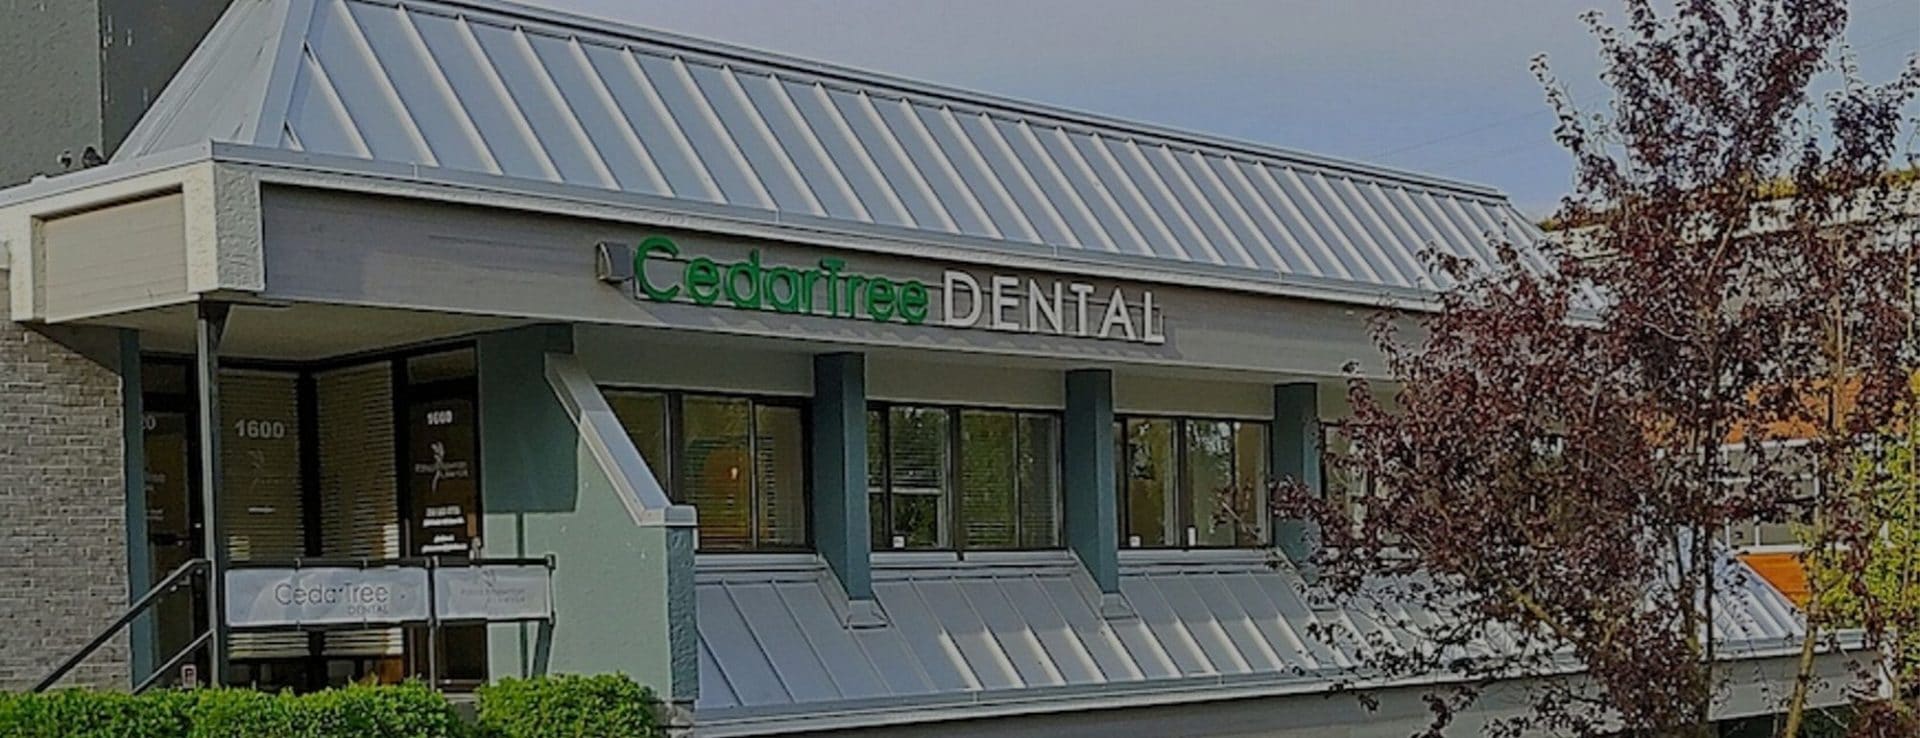 About our Victoria Dentist Office | Cedar Tree Dental